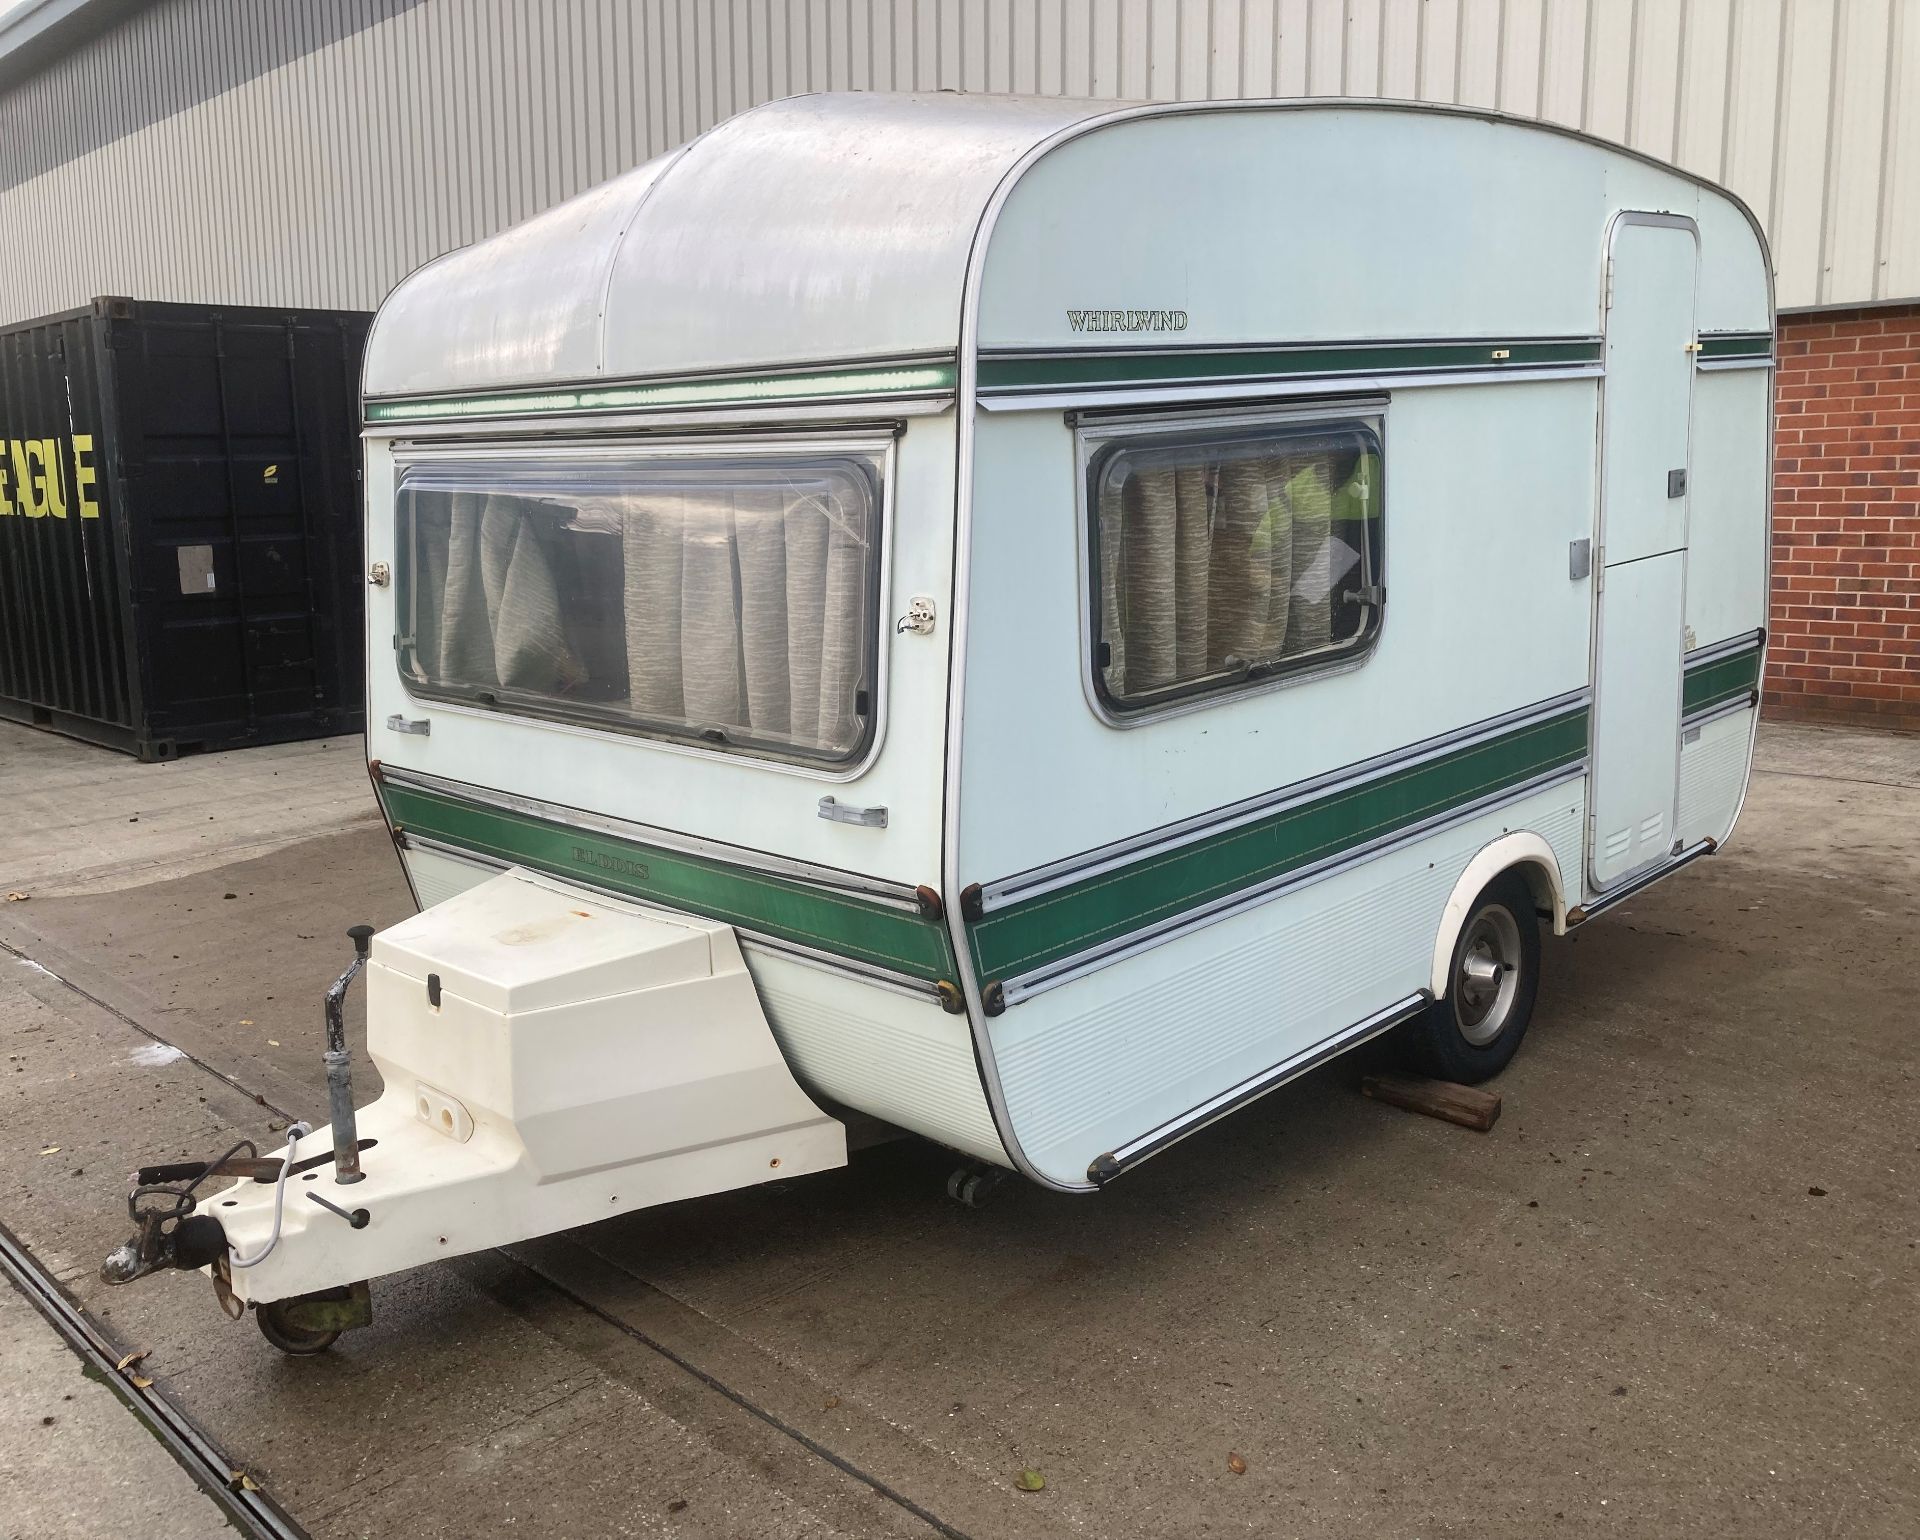 AN ELDDIS WHIRLWIND TWO BERTH TOURING CARAVAN - White with green trim. Serial No: 11344E. - Image 5 of 8